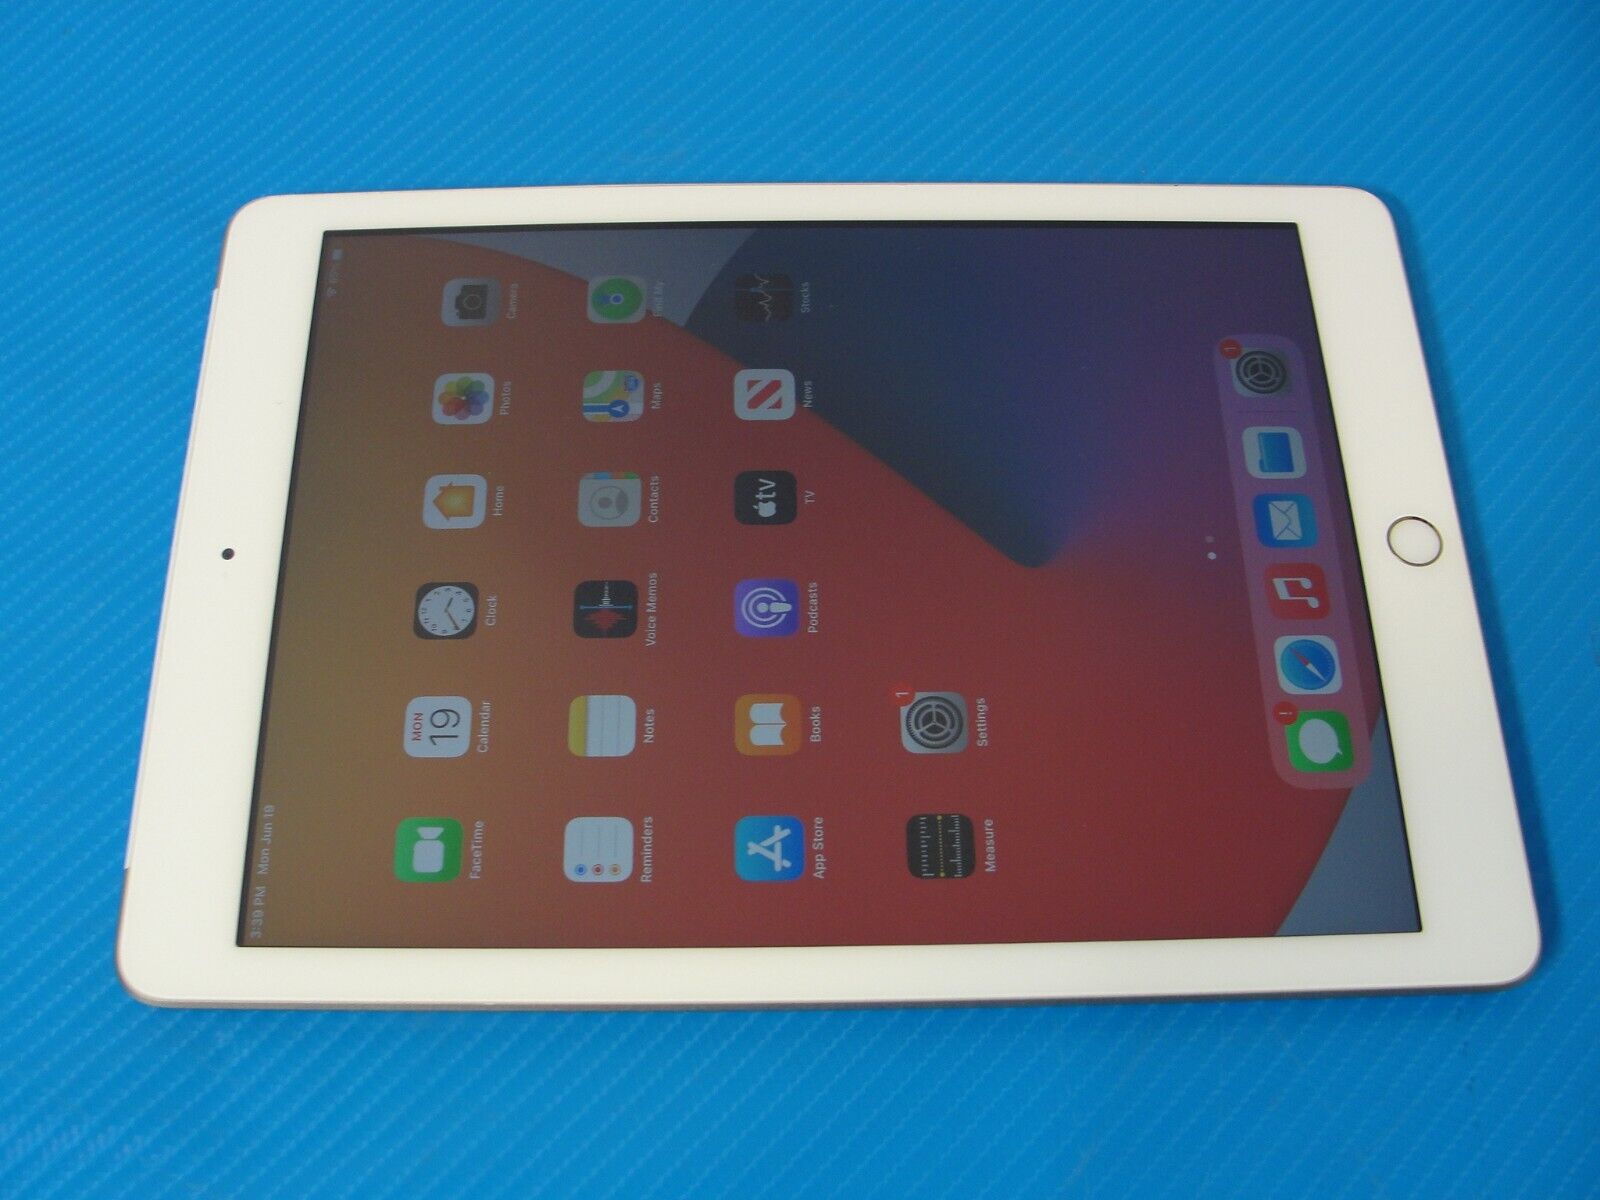 Apple iPad 5th Gen 9.7'' 32GB A1823 WiFi 4G LTE AT&T Tablet GOLD